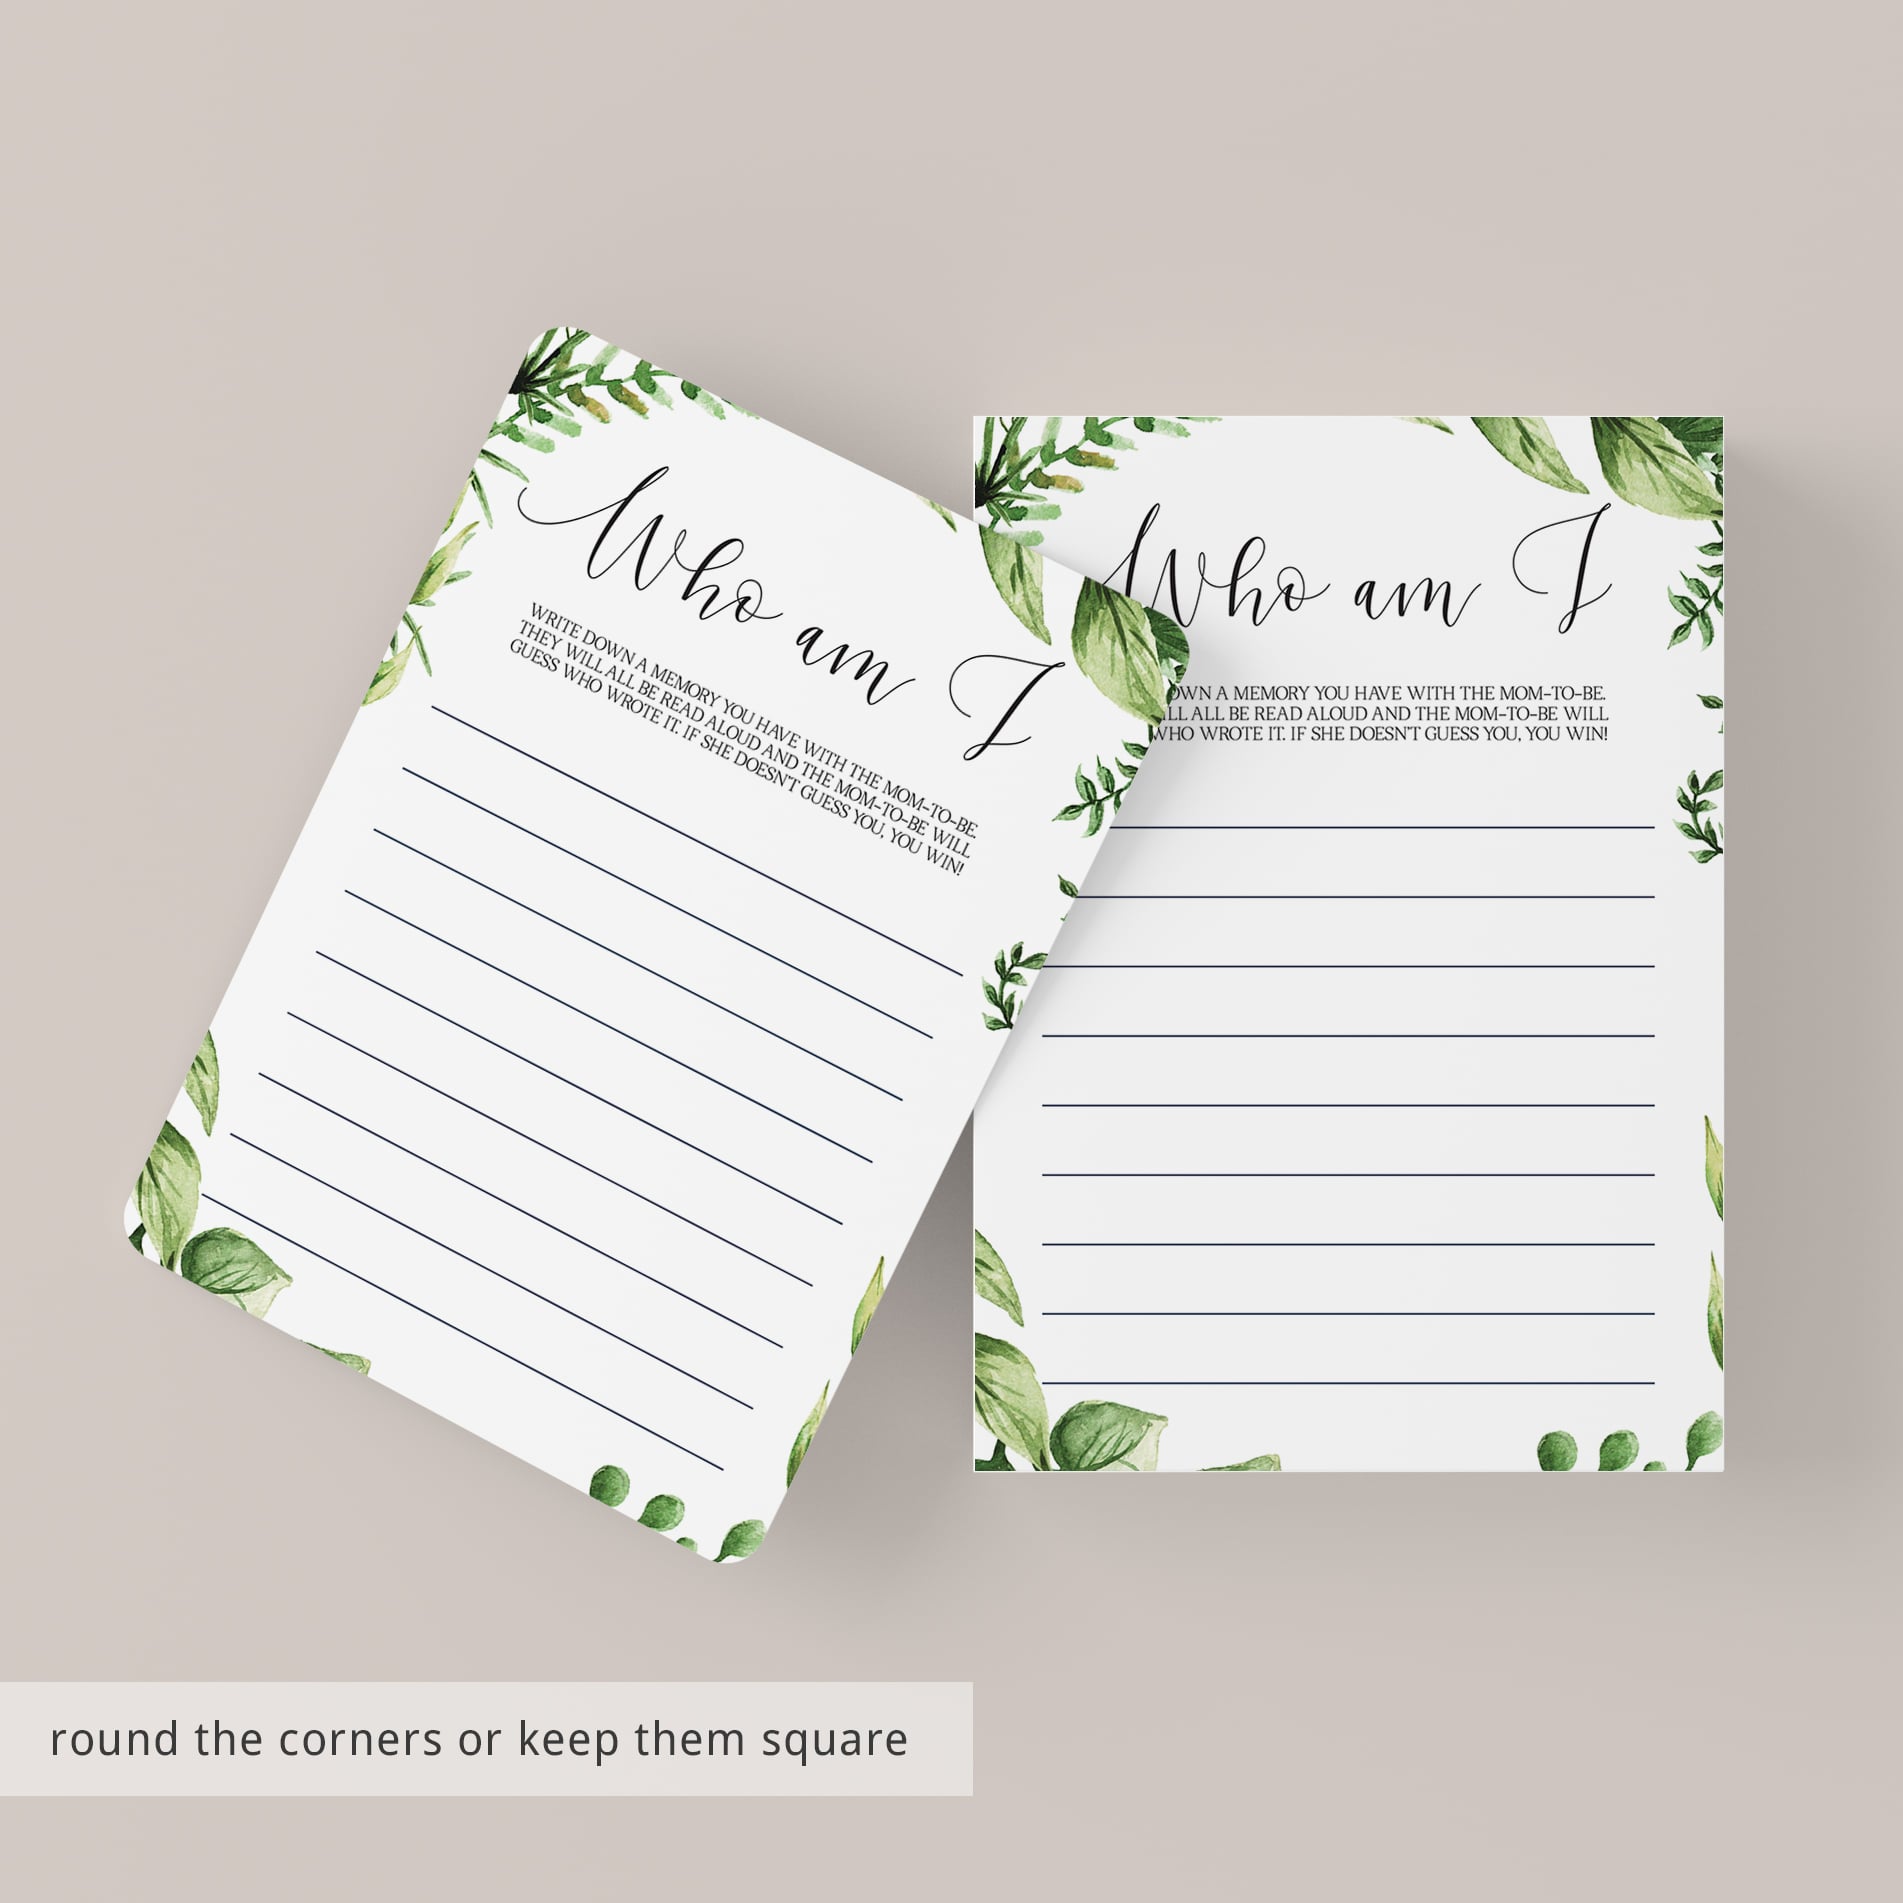 Memories of the mom to be for baby shower game by LittleSizzle